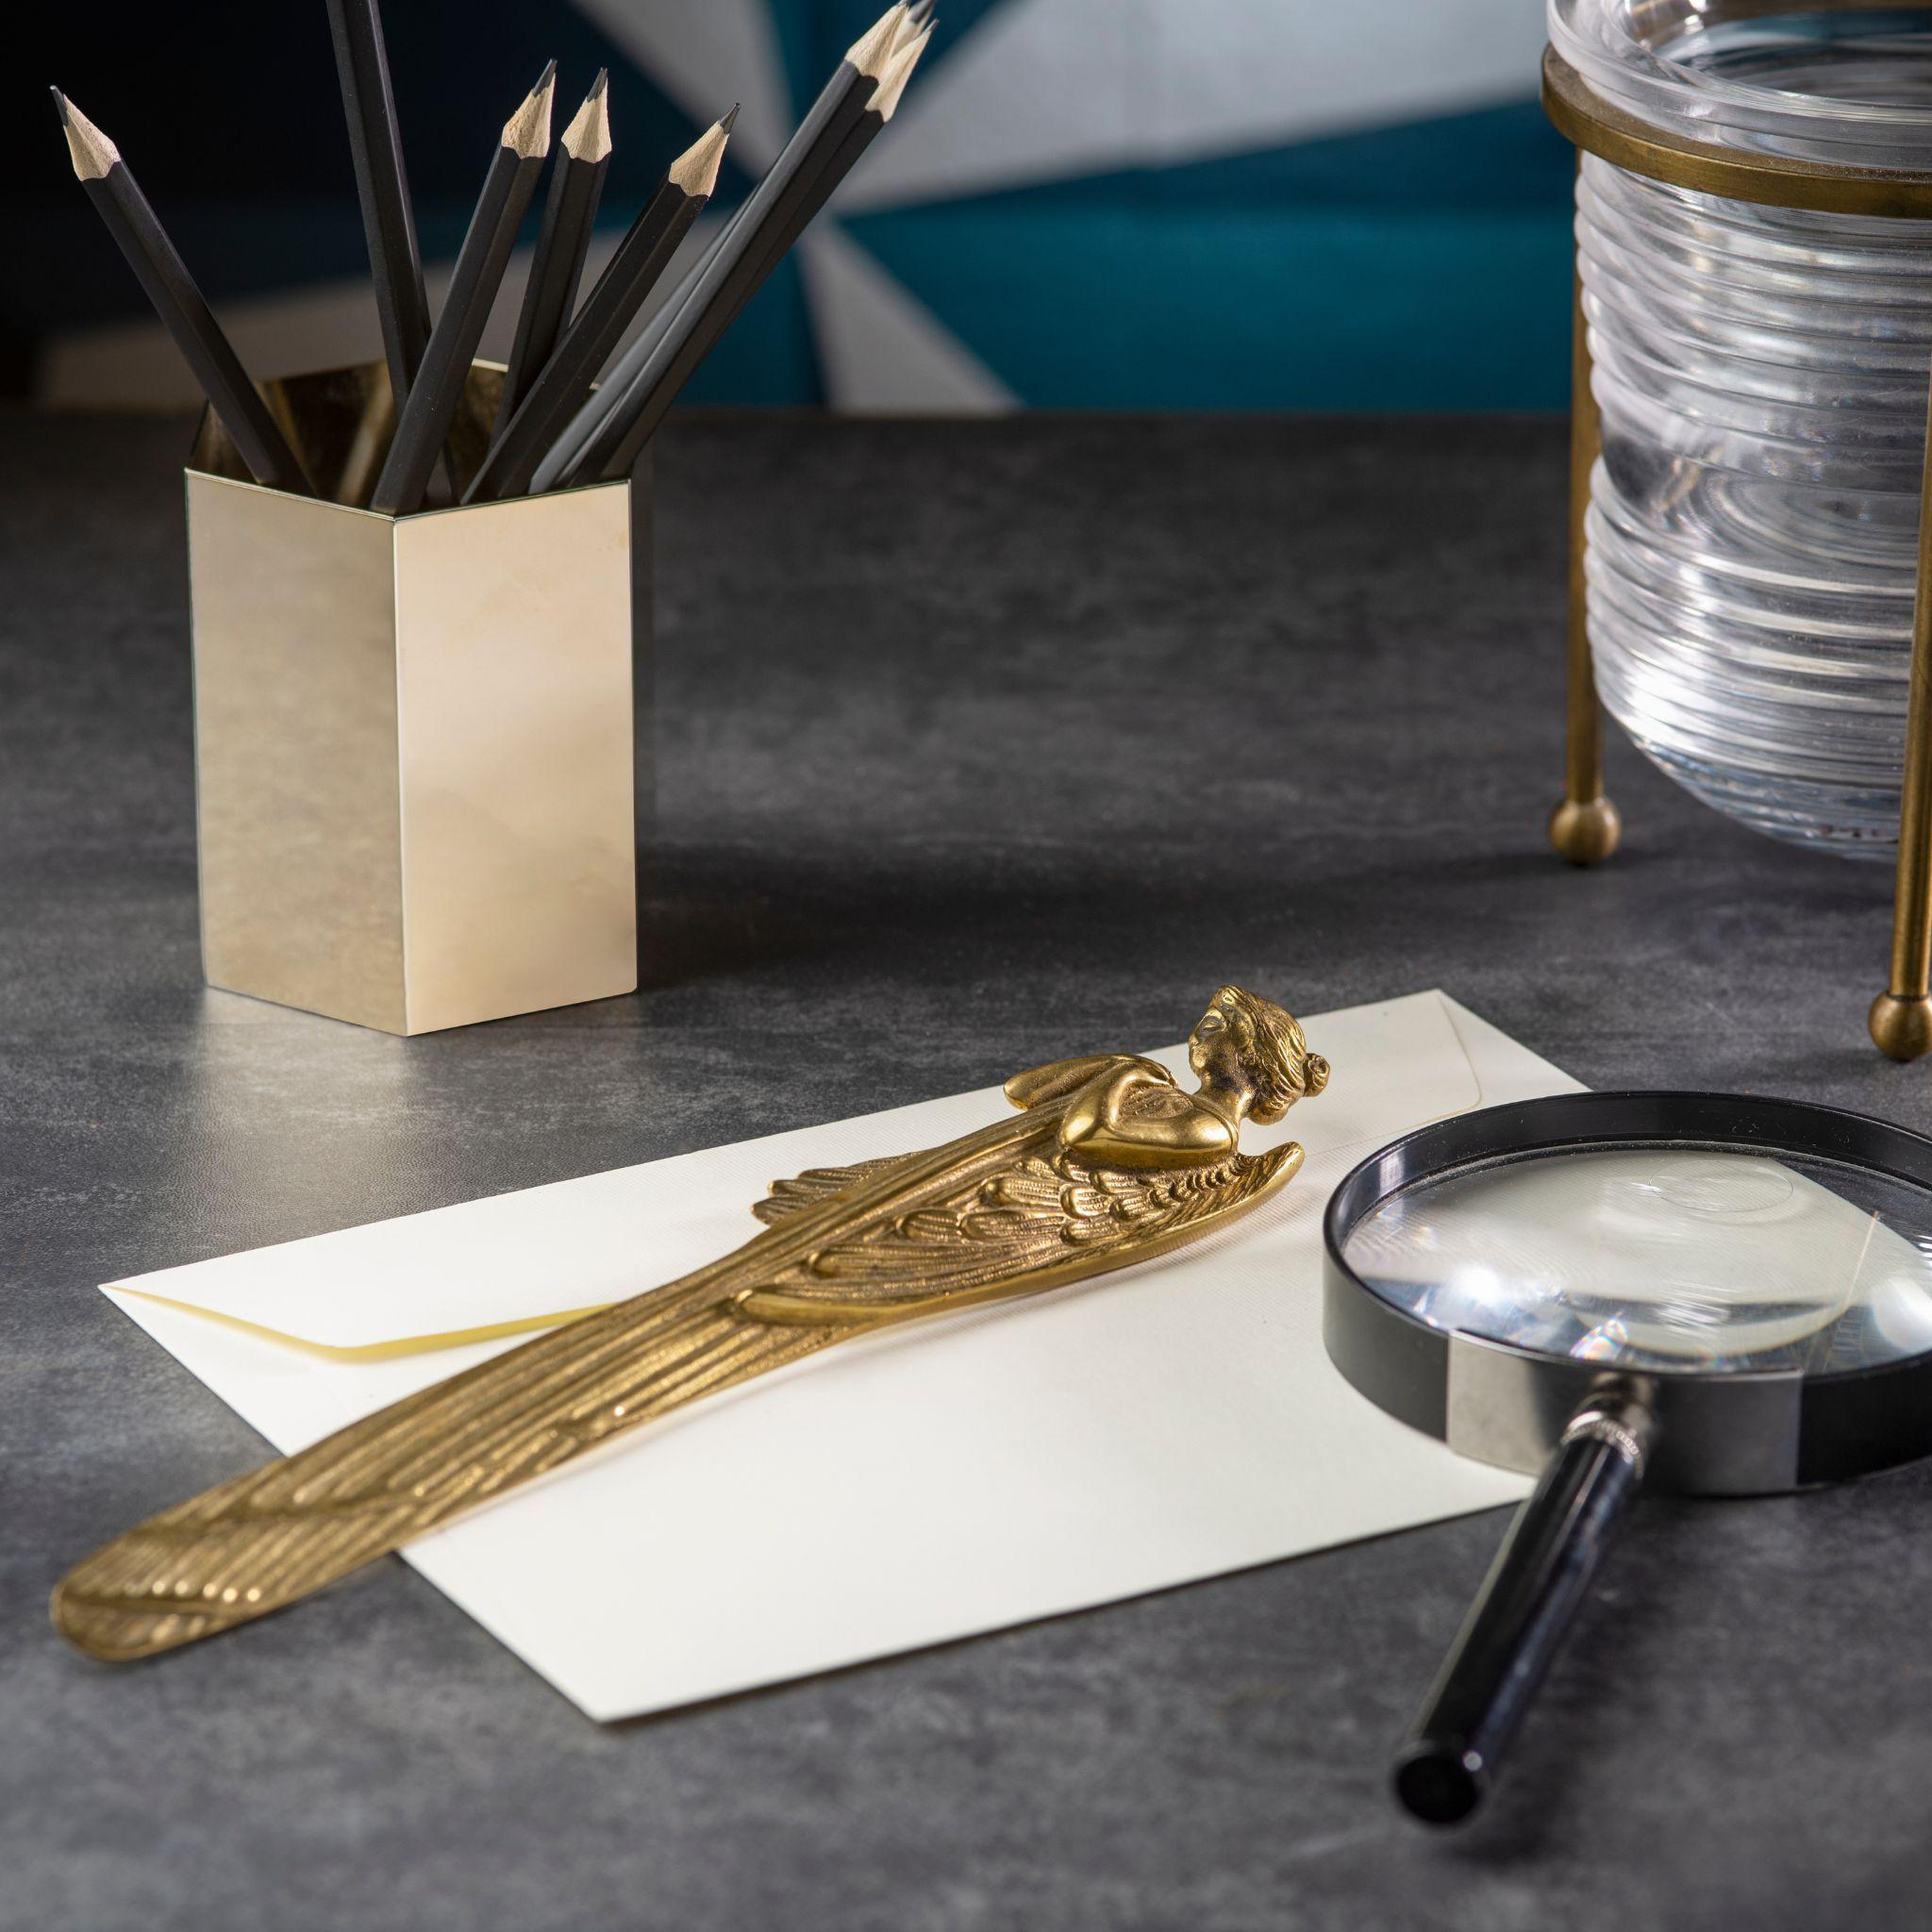 Upgrade your workspace with our angle-shaped casting bronze paper cutter. Made from high-quality bronze, its unique and stylish design adds sophistication to any office or home. With a sharp cutting blade, it is perfect for cutting paper and makes